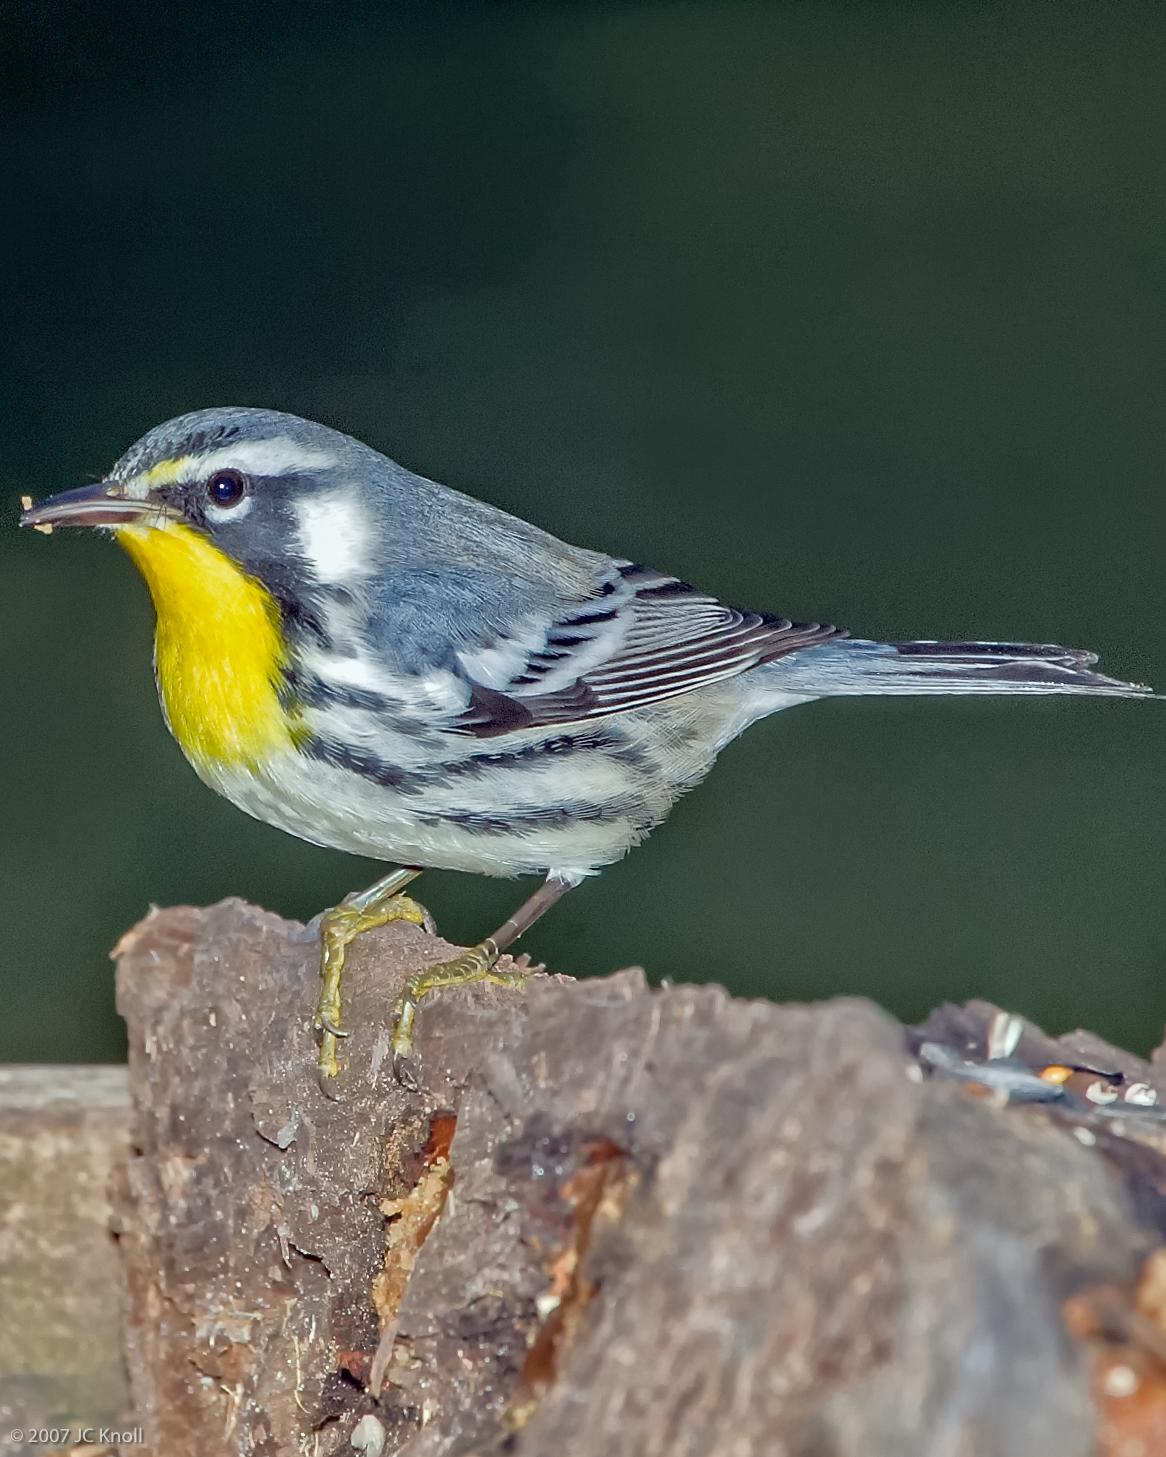 Yellow-throated Warbler (dominica/stoddardi) Photo by JC Knoll